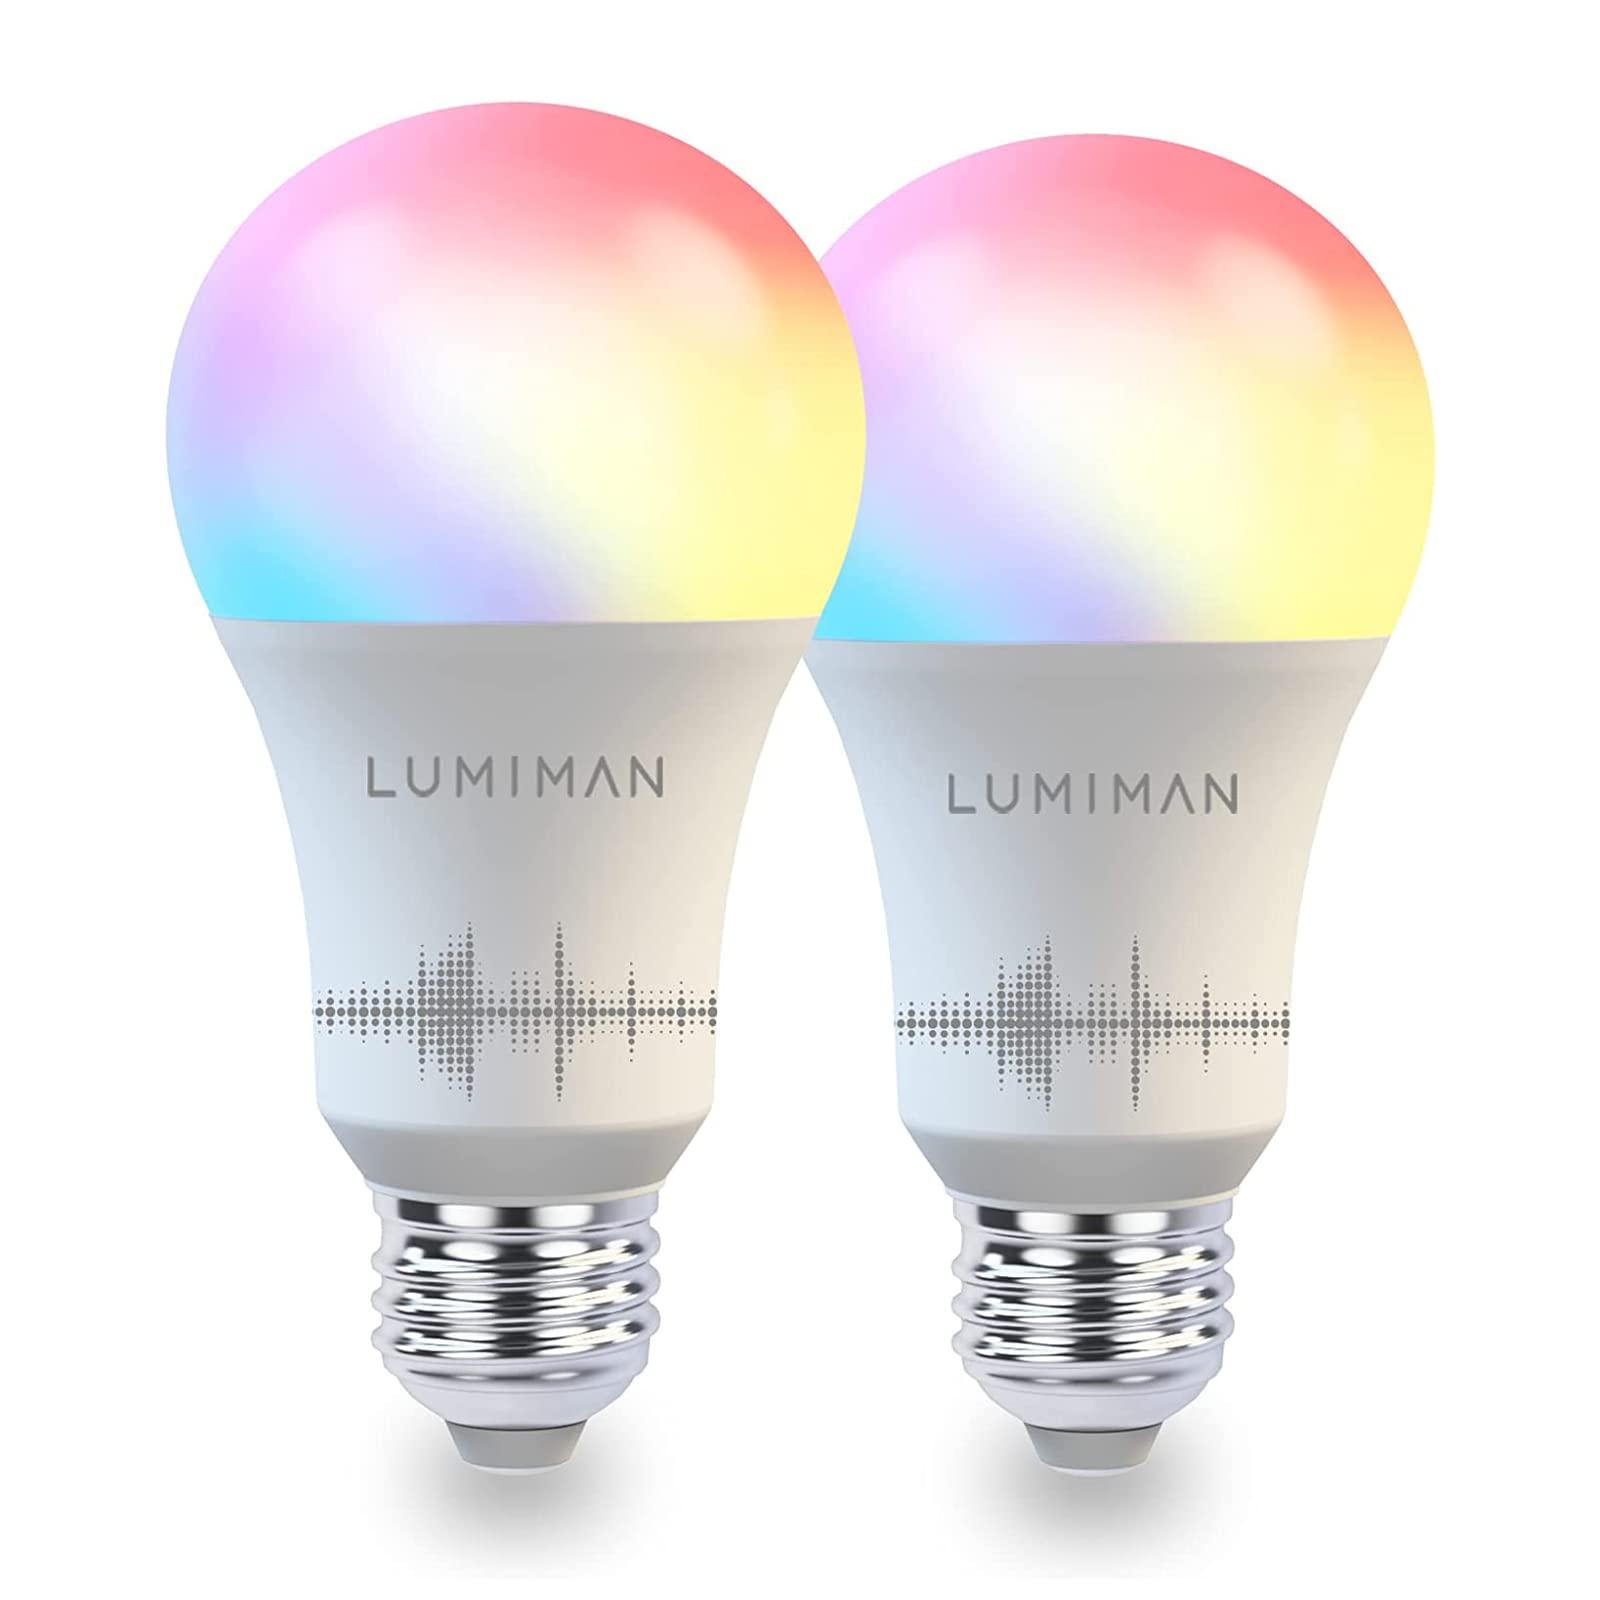 LUMIMAN Smart Light Bulbs, Full Color Changing Light Bulb, Music Sync, Warm to Cool White Smart Bulb, WiFi Alexa Light Bulb, A19 800LM 7.5W, Works with Alexa Google Home, No Hub Required, 2 Pack